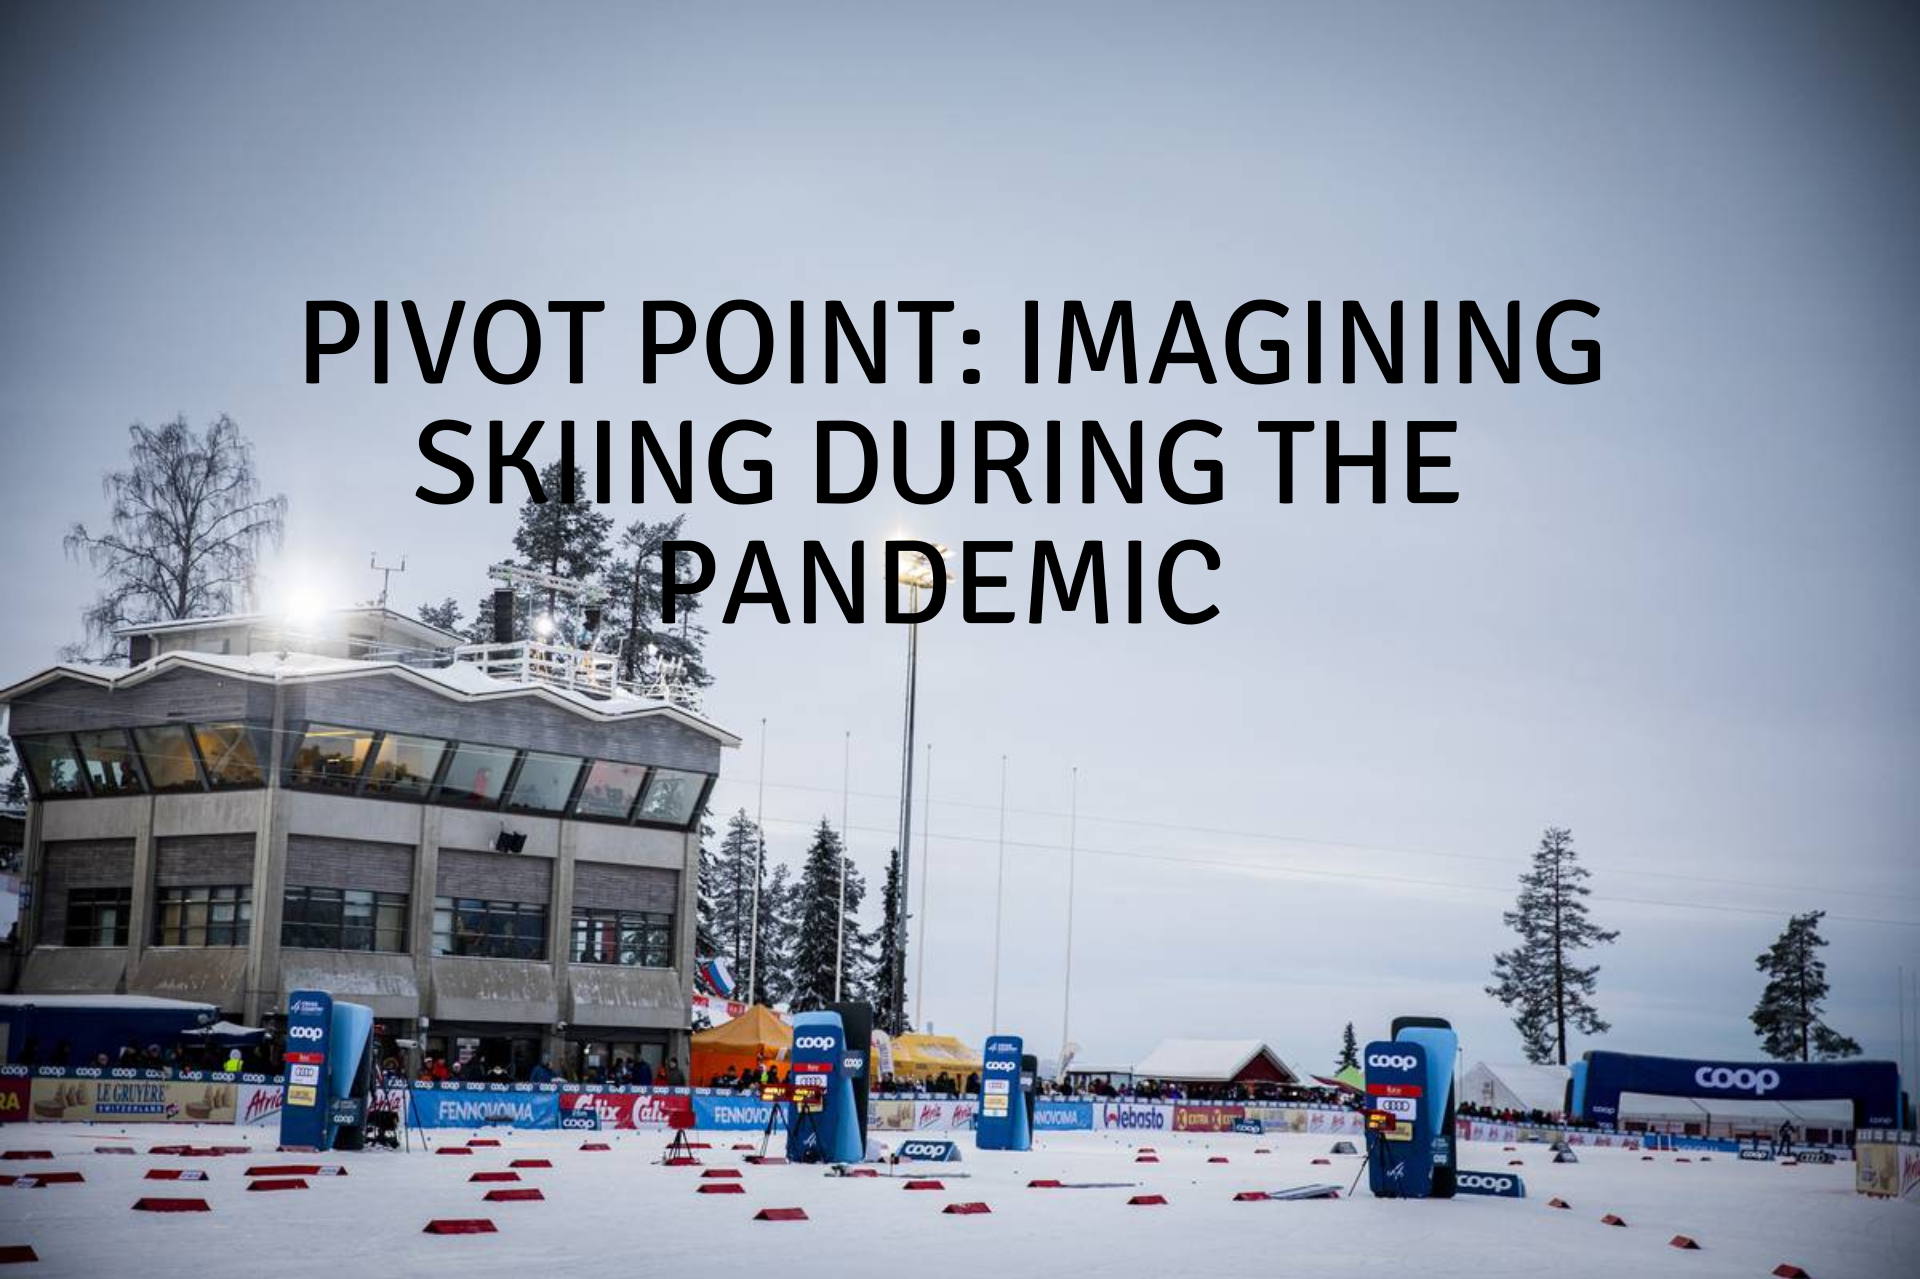 Pivot Point: Imagining Skiing During the Pandemic